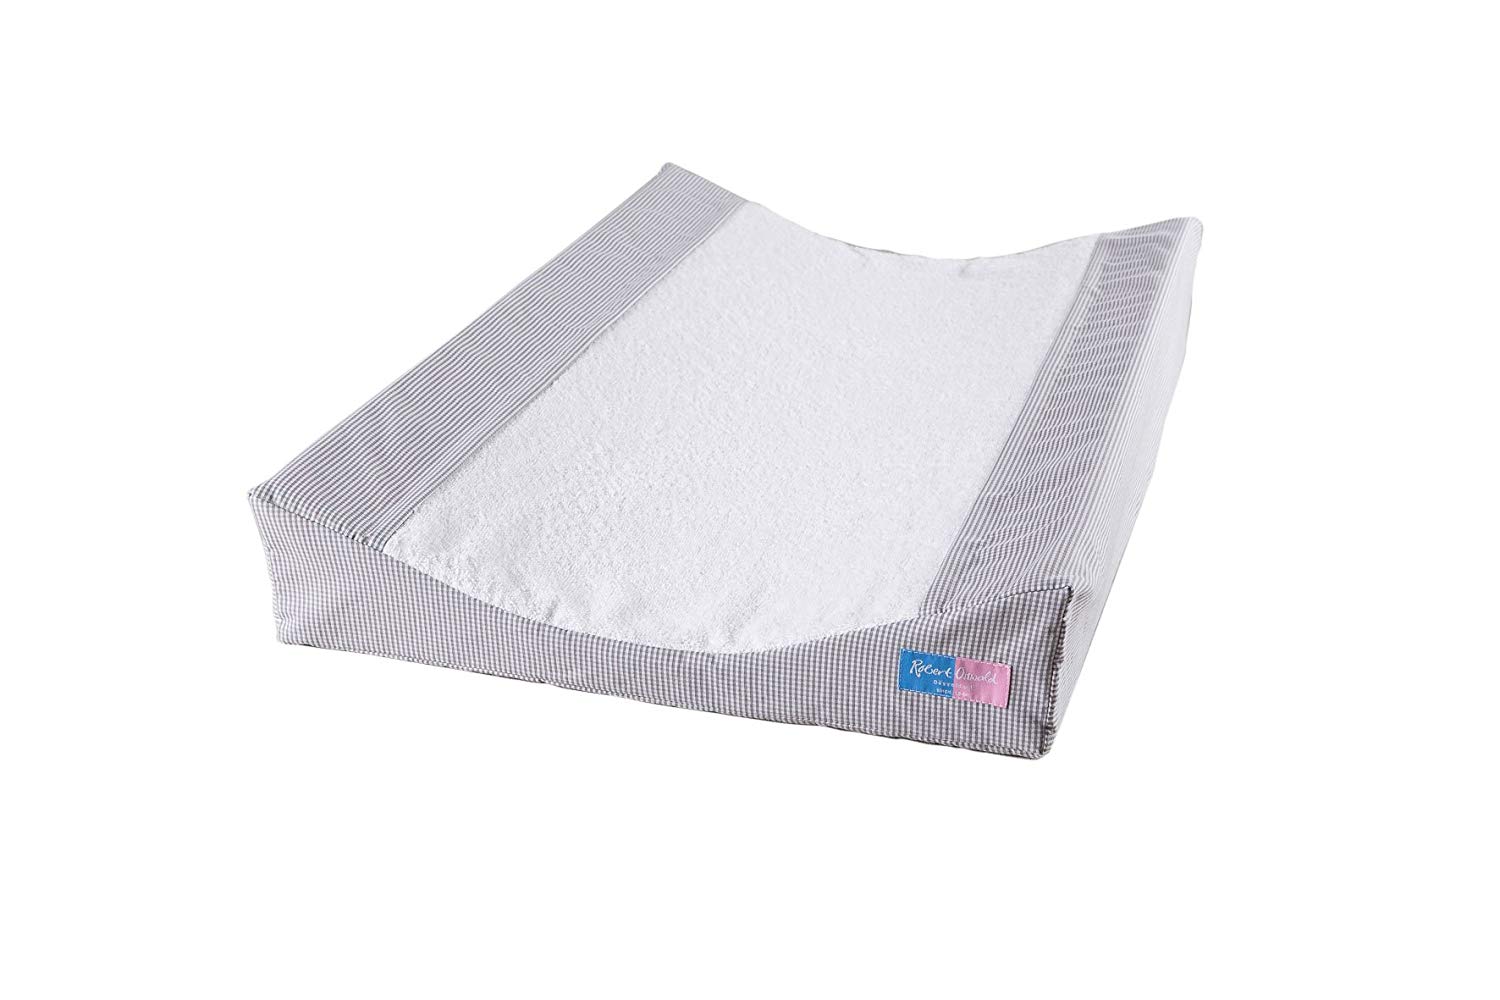 Robert Osswald 1.4.1.3.1.1-K01-11 Changing Mat with 2 Wedge Holes with Terry Cloth Cover and Inlet 45 cm x 70 cm Blue